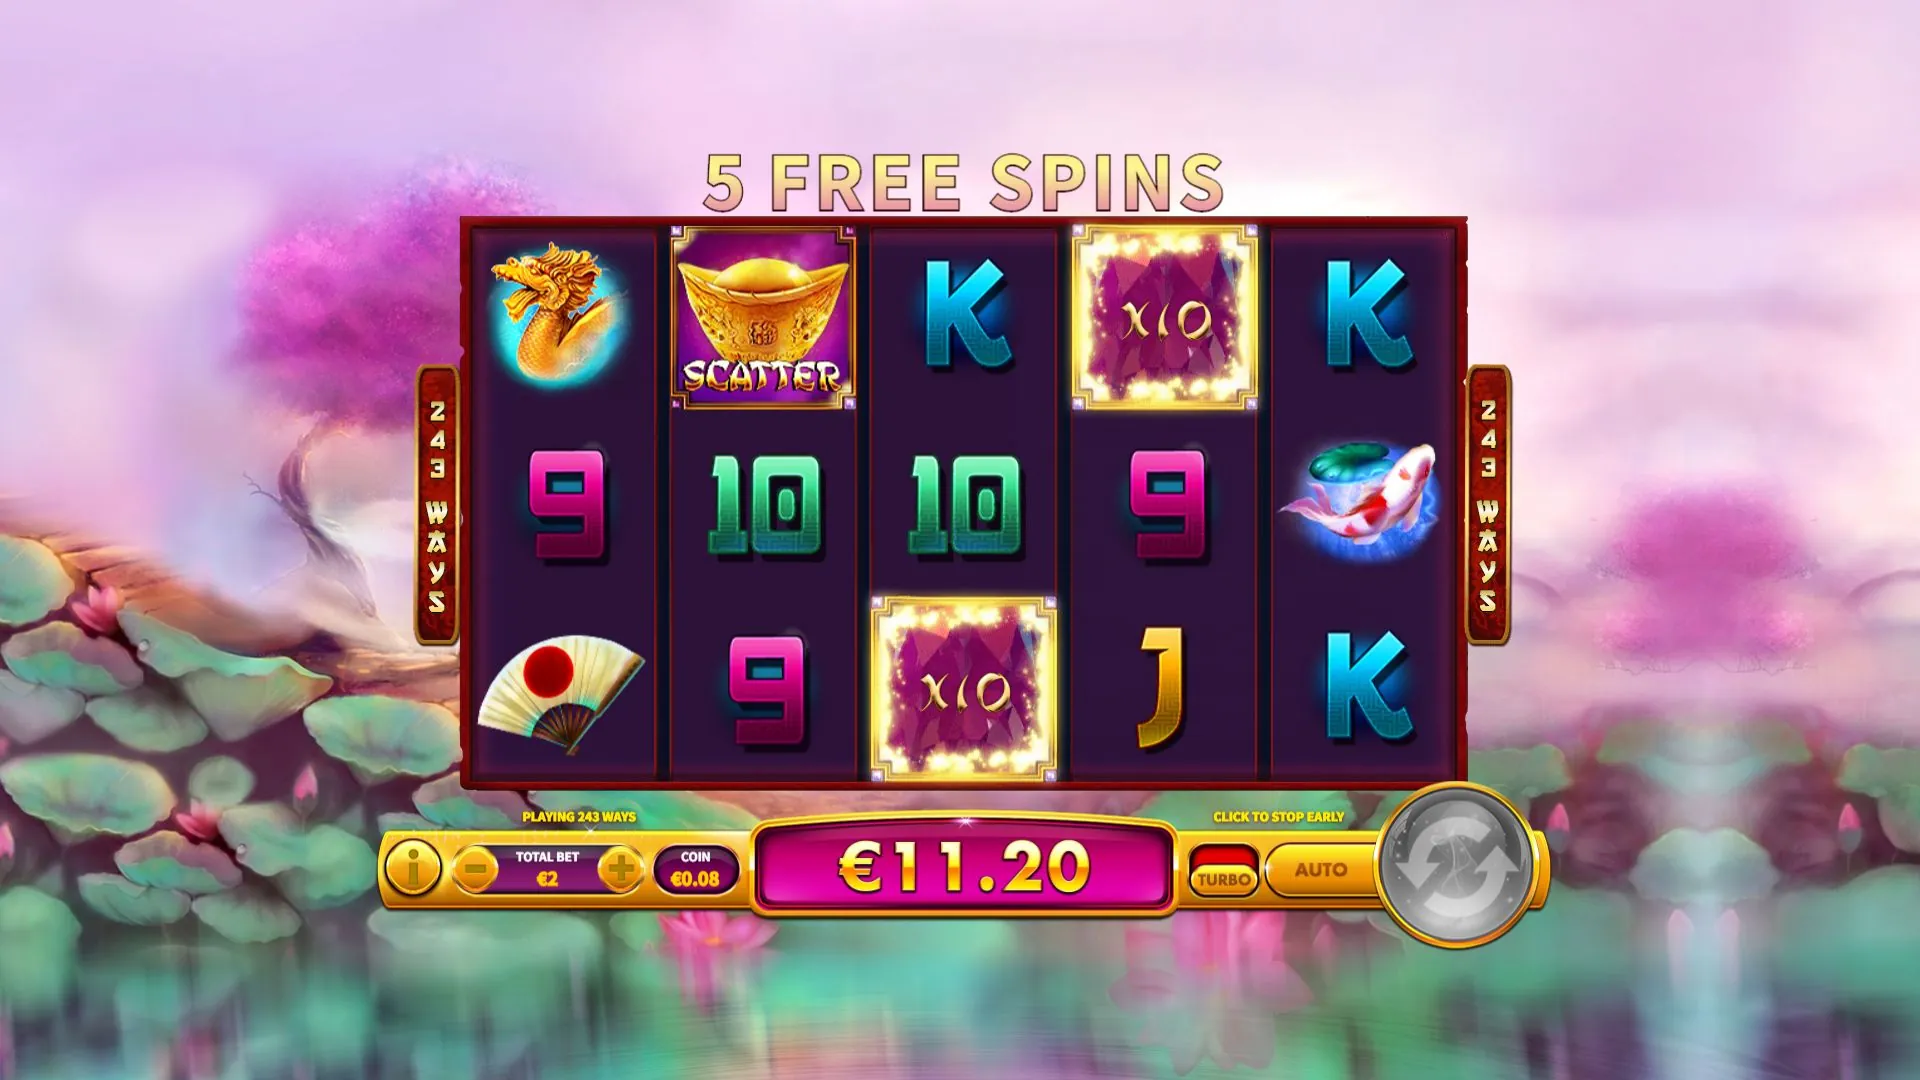 The Samurai and Free Spins